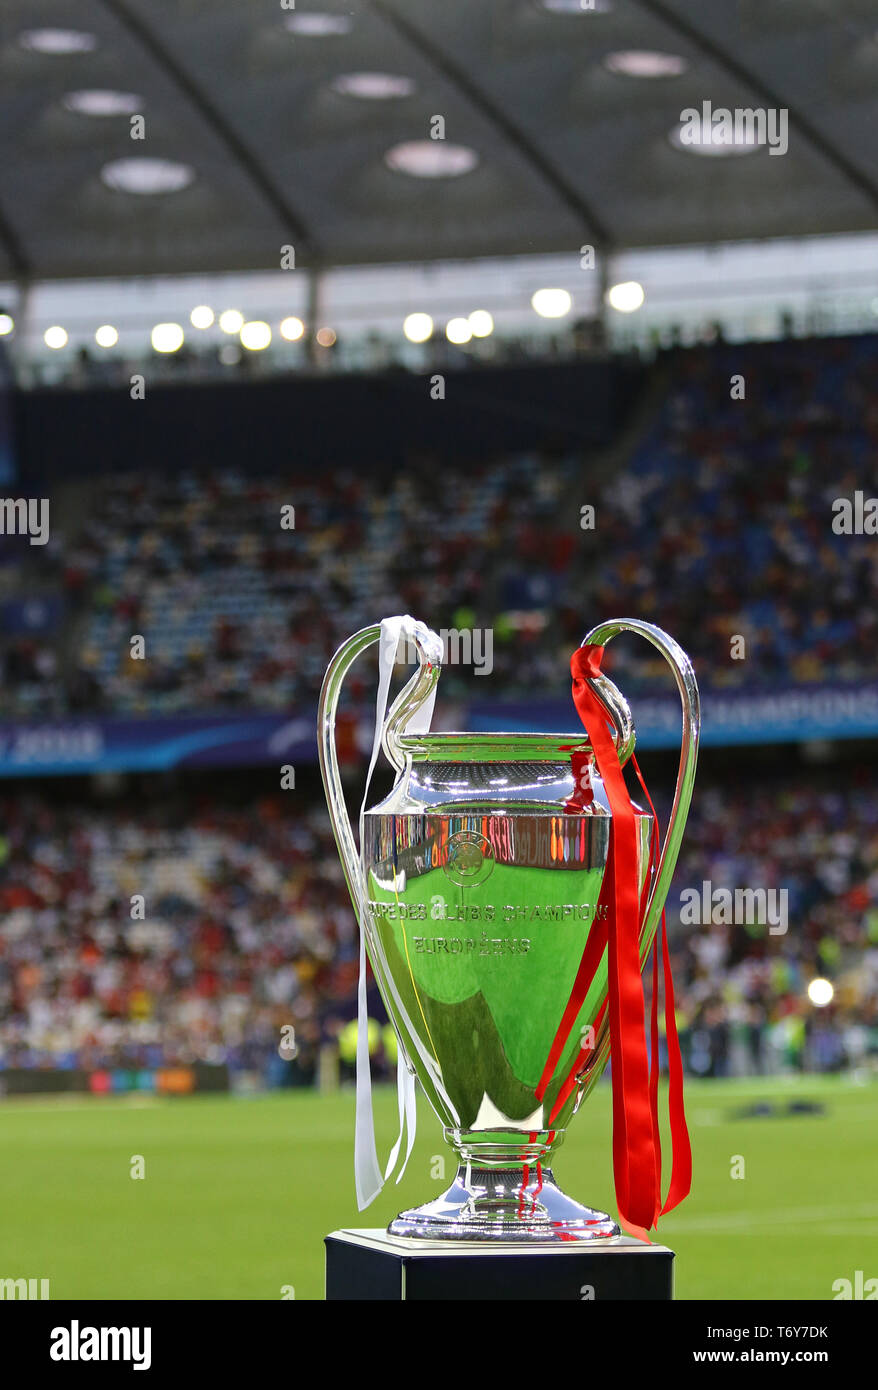 Uefa Champions League Trophy Cup Presents Before The Final Game Between Real Madrid And Liverpool Stock Photo Alamy